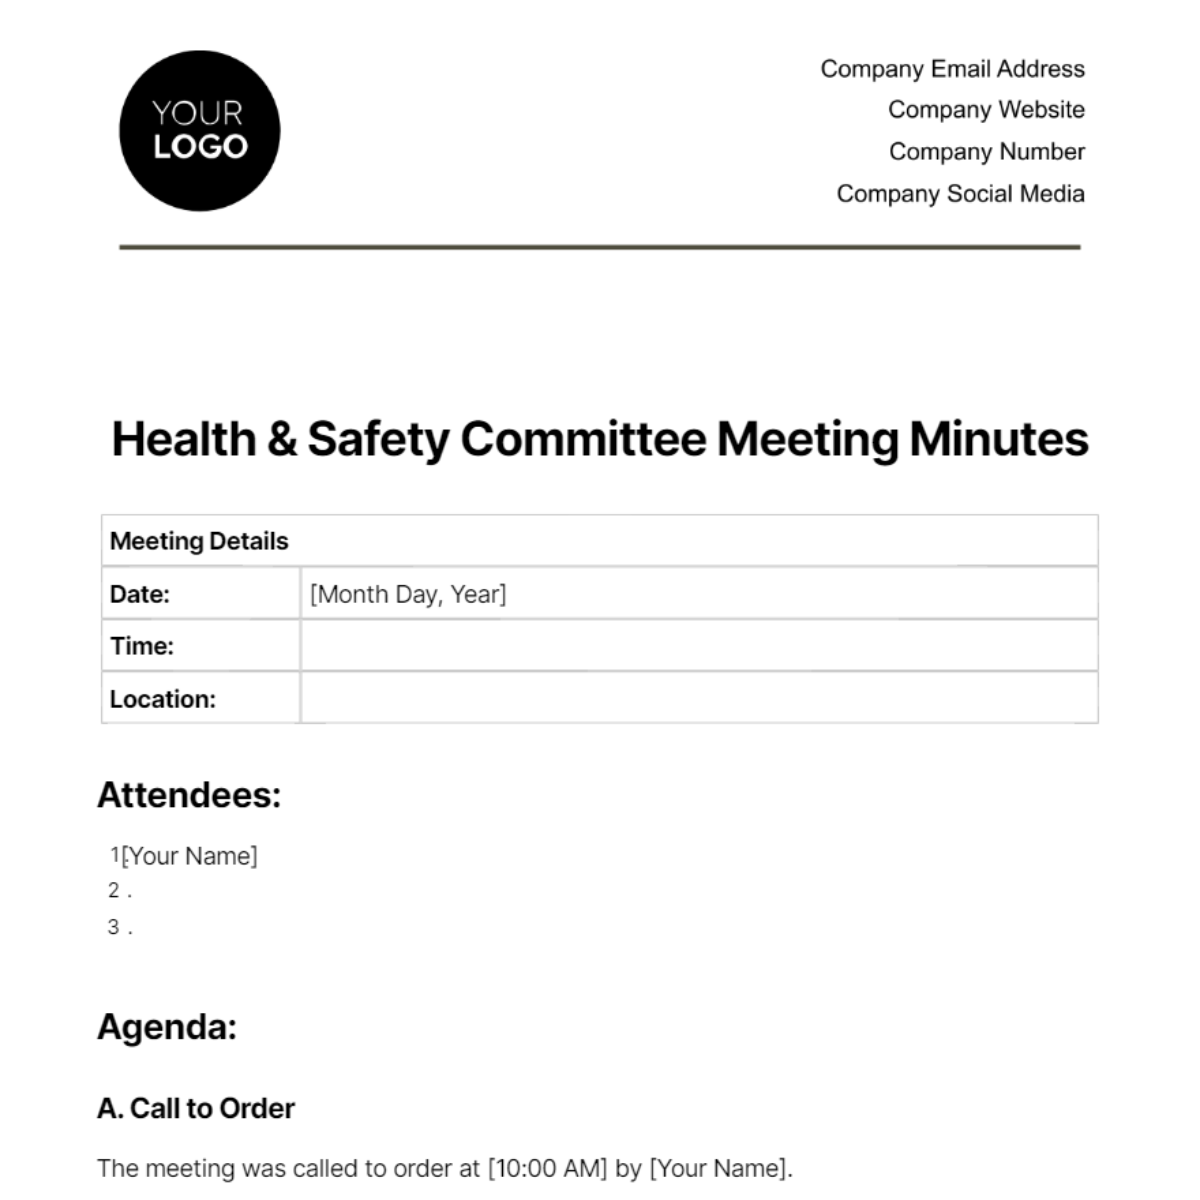 Free Health & Safety Committee Meeting Minutes Template